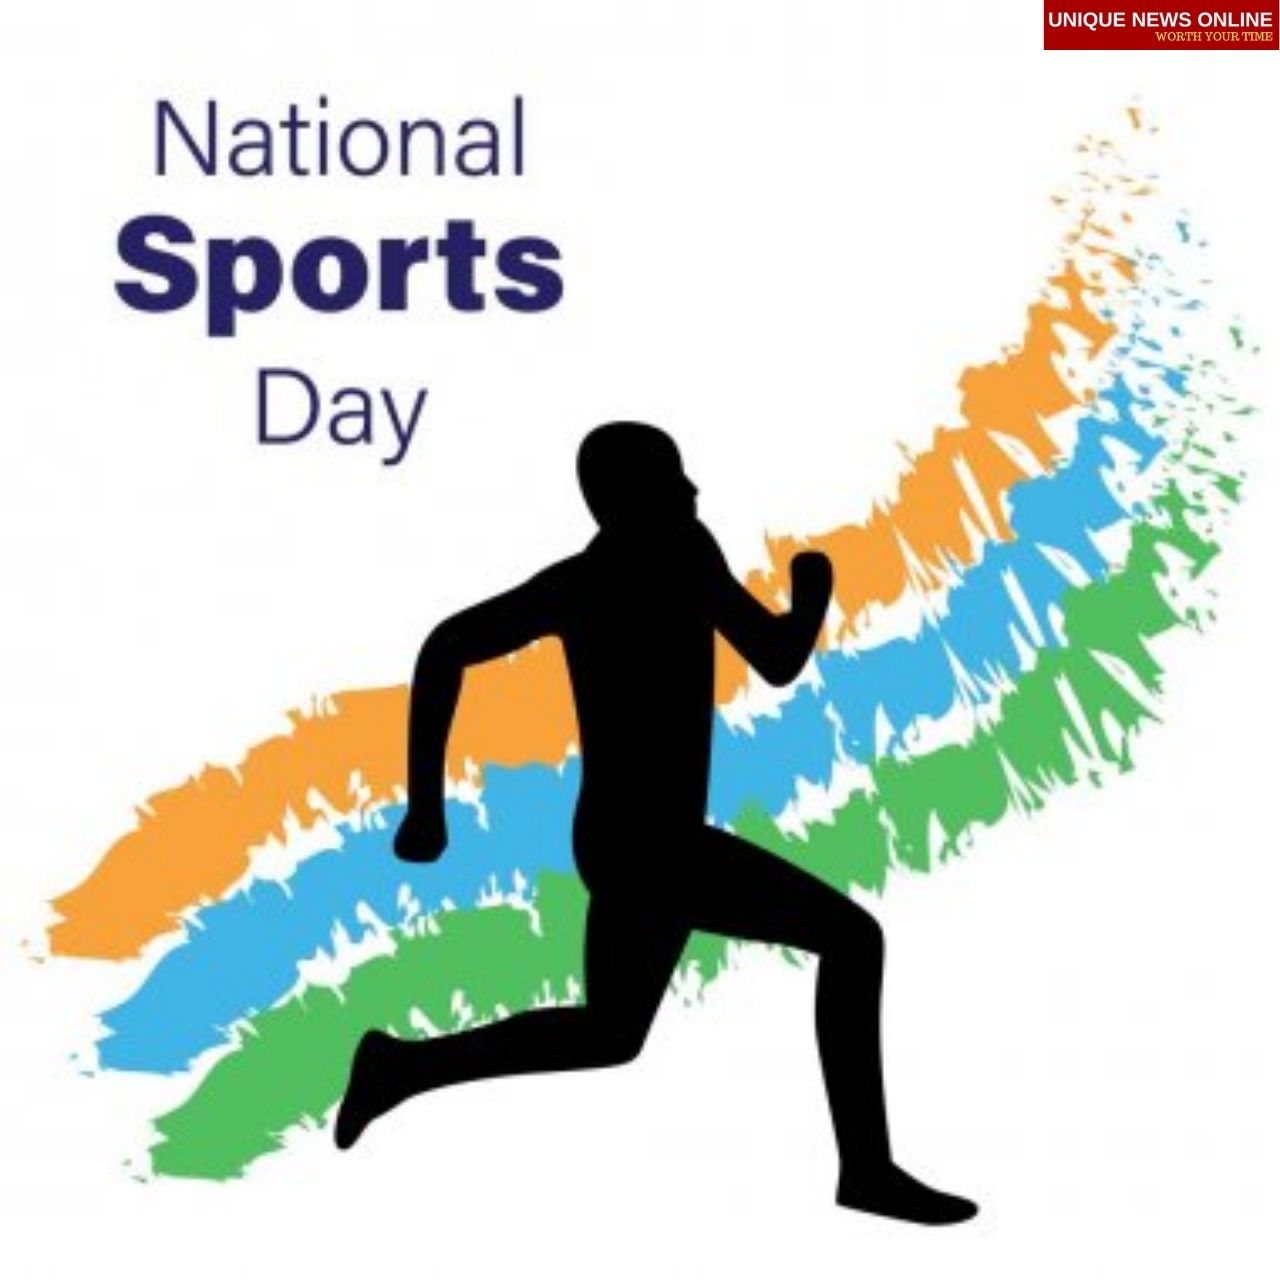 National Sports Day 2021 India: Best Motivational Quotes, HD Images, Messages, Wishes, Greetings to share on the birth anniversary of hockey legend Major Dhyan Chand